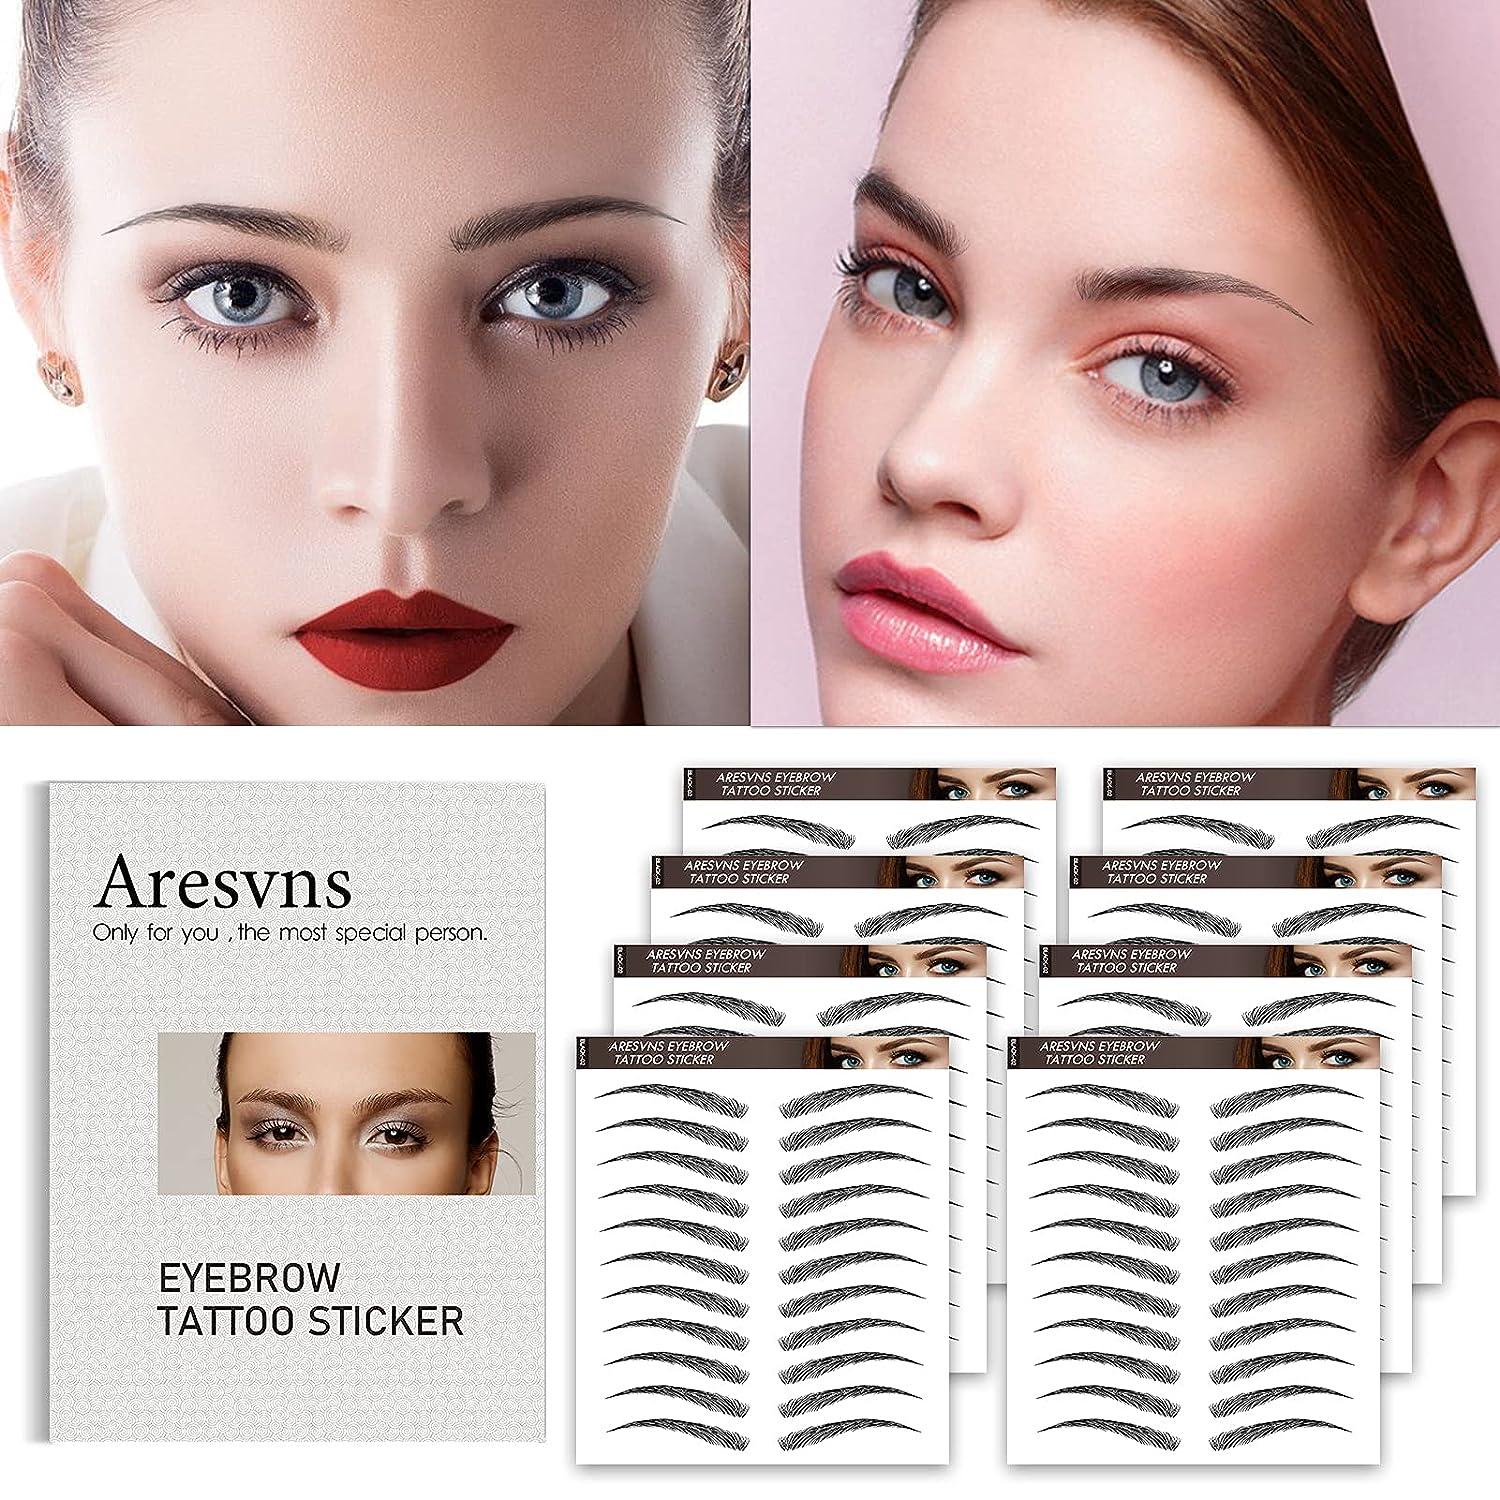 What To Consider When Getting Temporary Eyebrow Tattoos - Woman's era